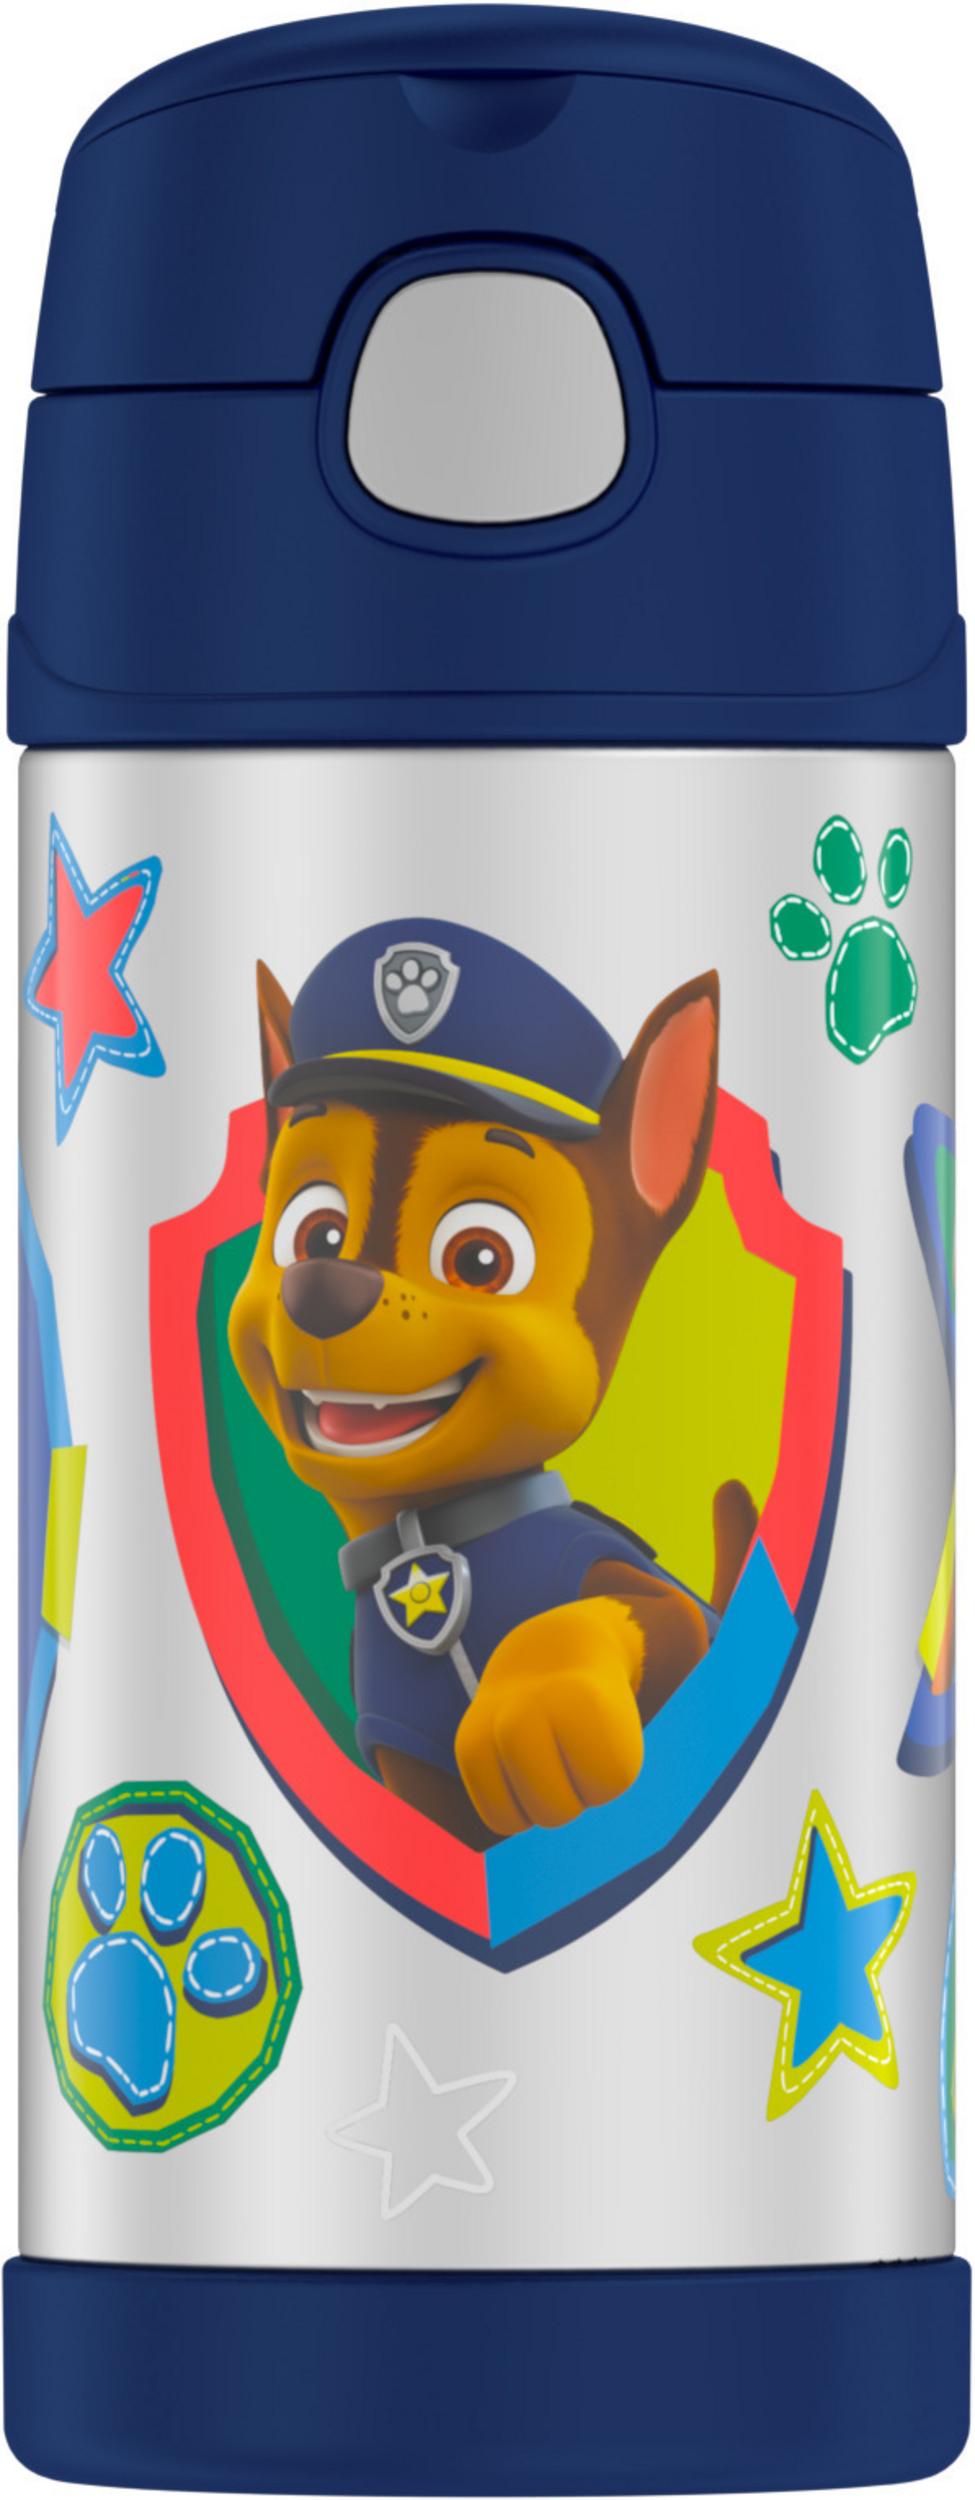 Thermos Kids Stainless Steel Vacuum Insulated Funtainer Straw Bottle, Paw Patrol, 12oz - image 3 of 9